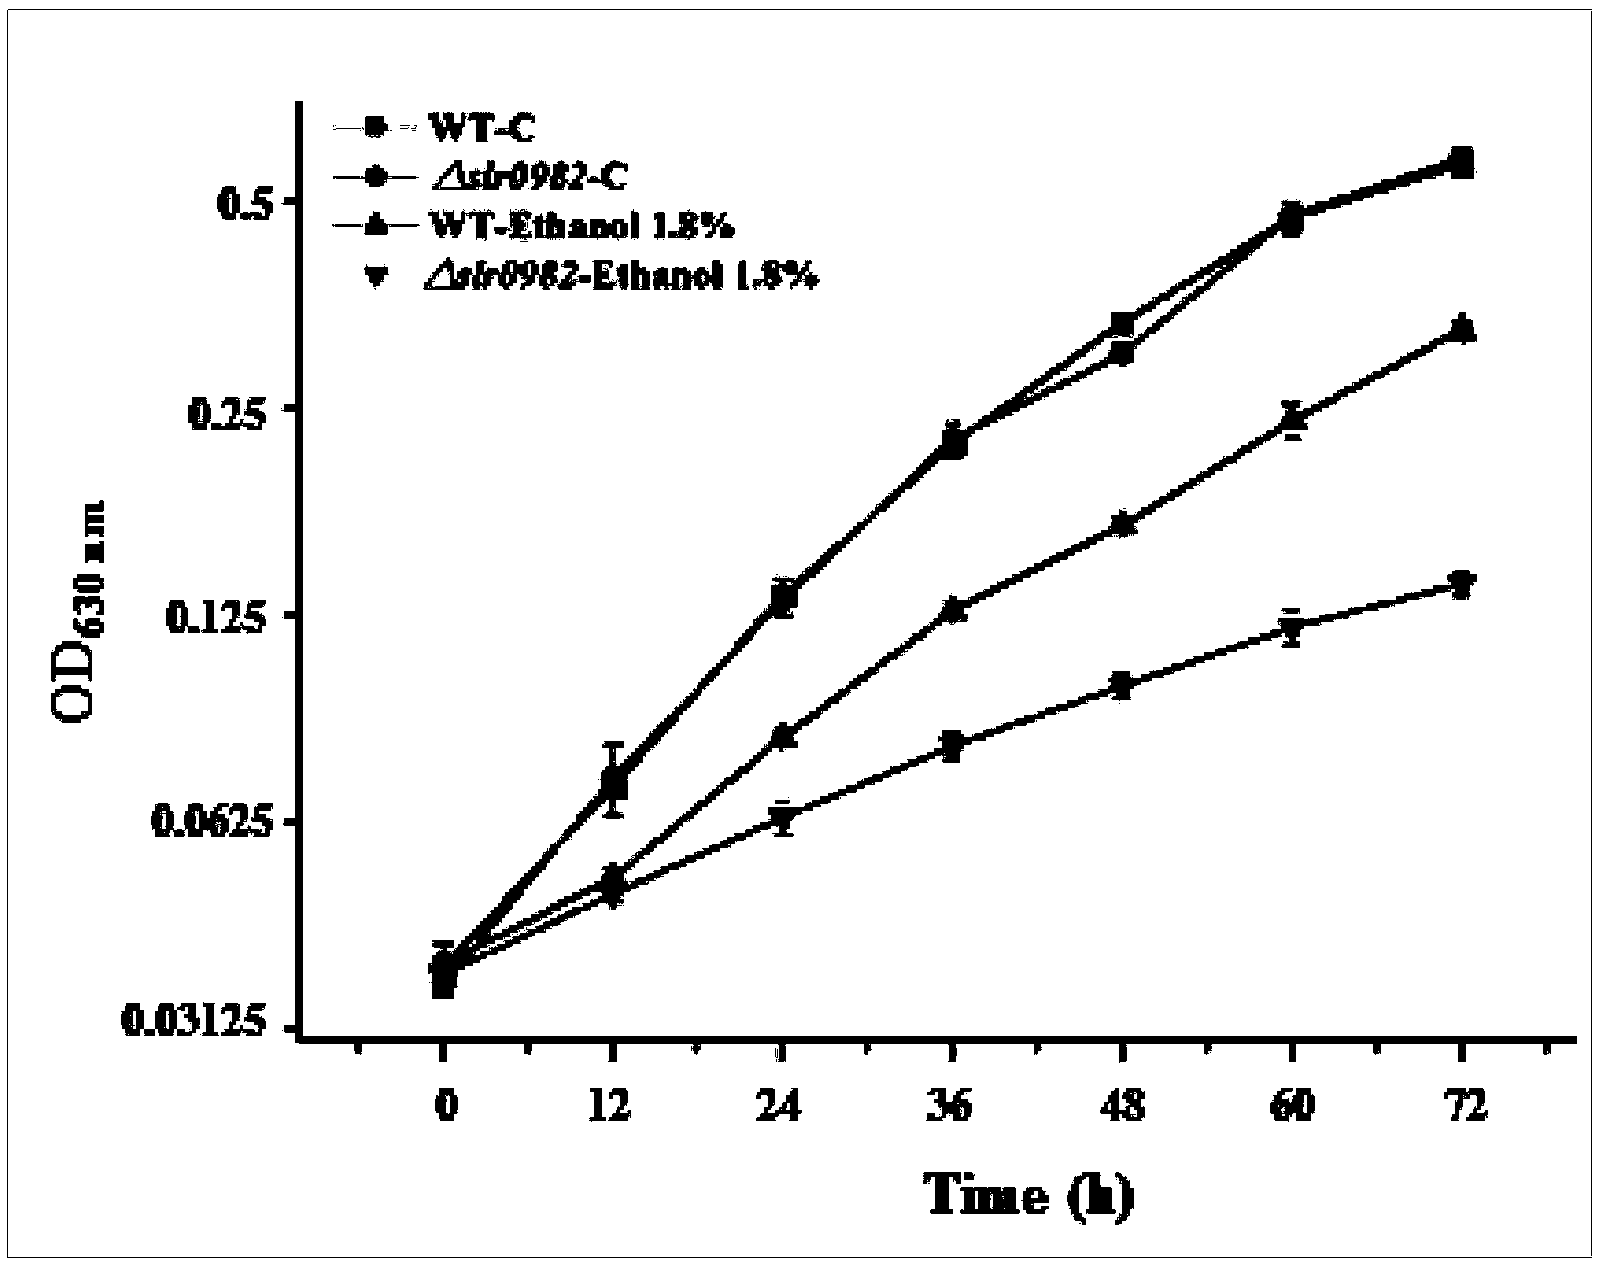 Ethanol-tolerant related gene slr0982 of synechocystis 6803 and applications of gene